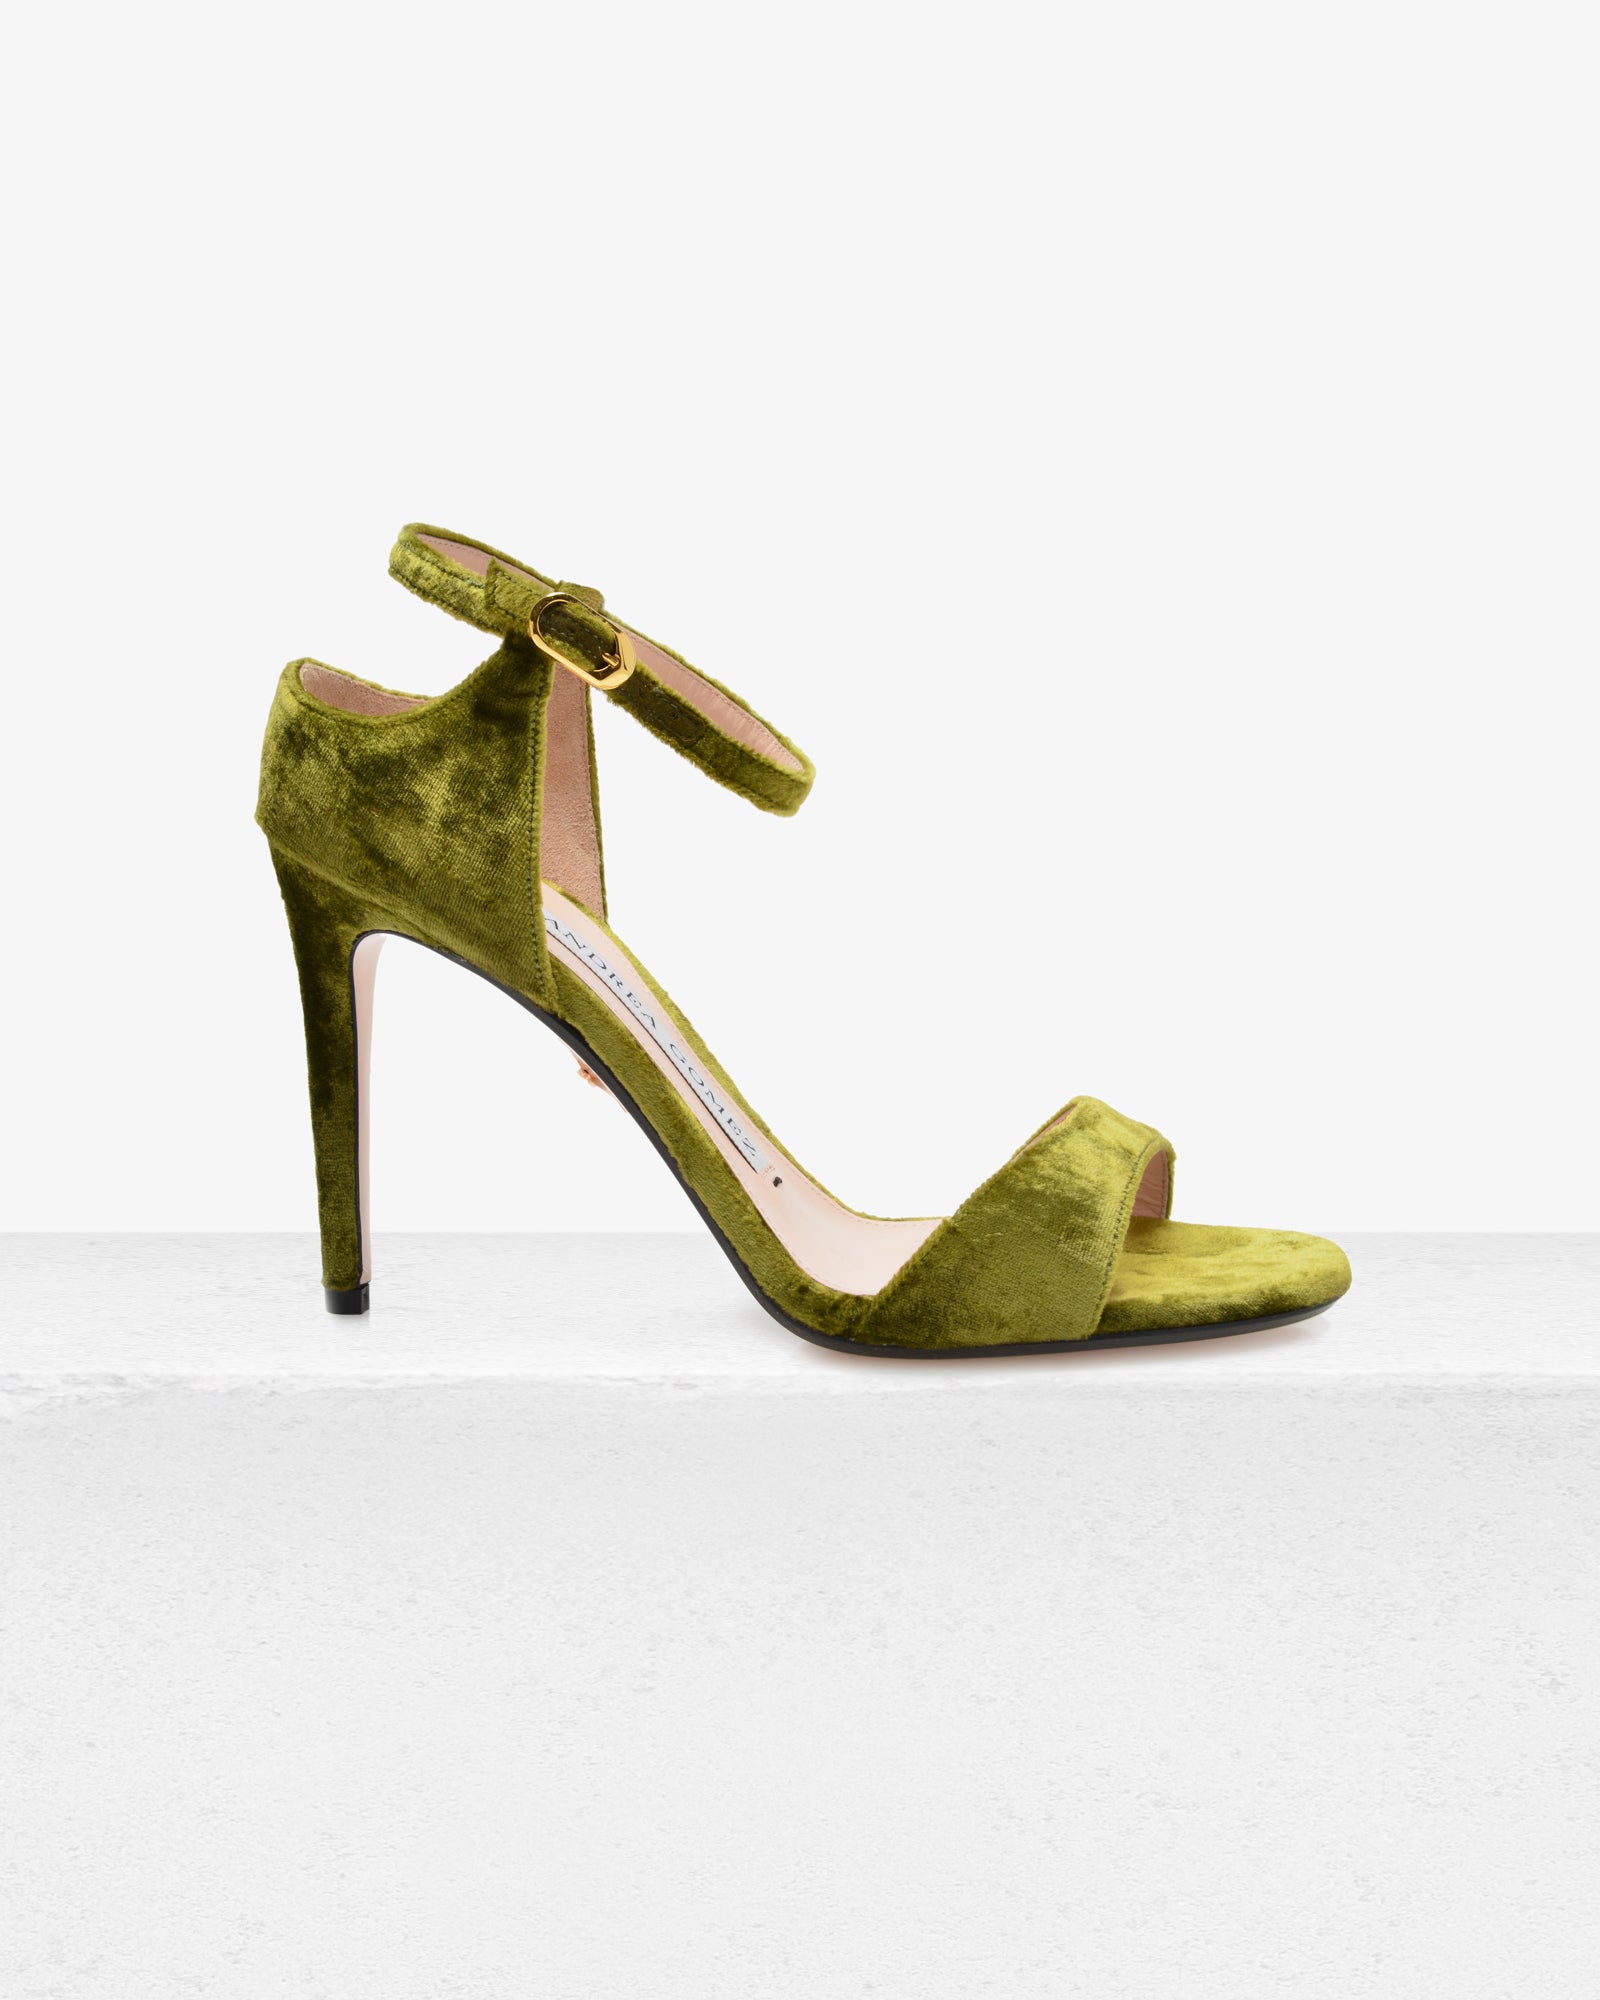 Only Alyx Croc Heeled Sandals in Olive Green | iCLOTHING - iCLOTHING